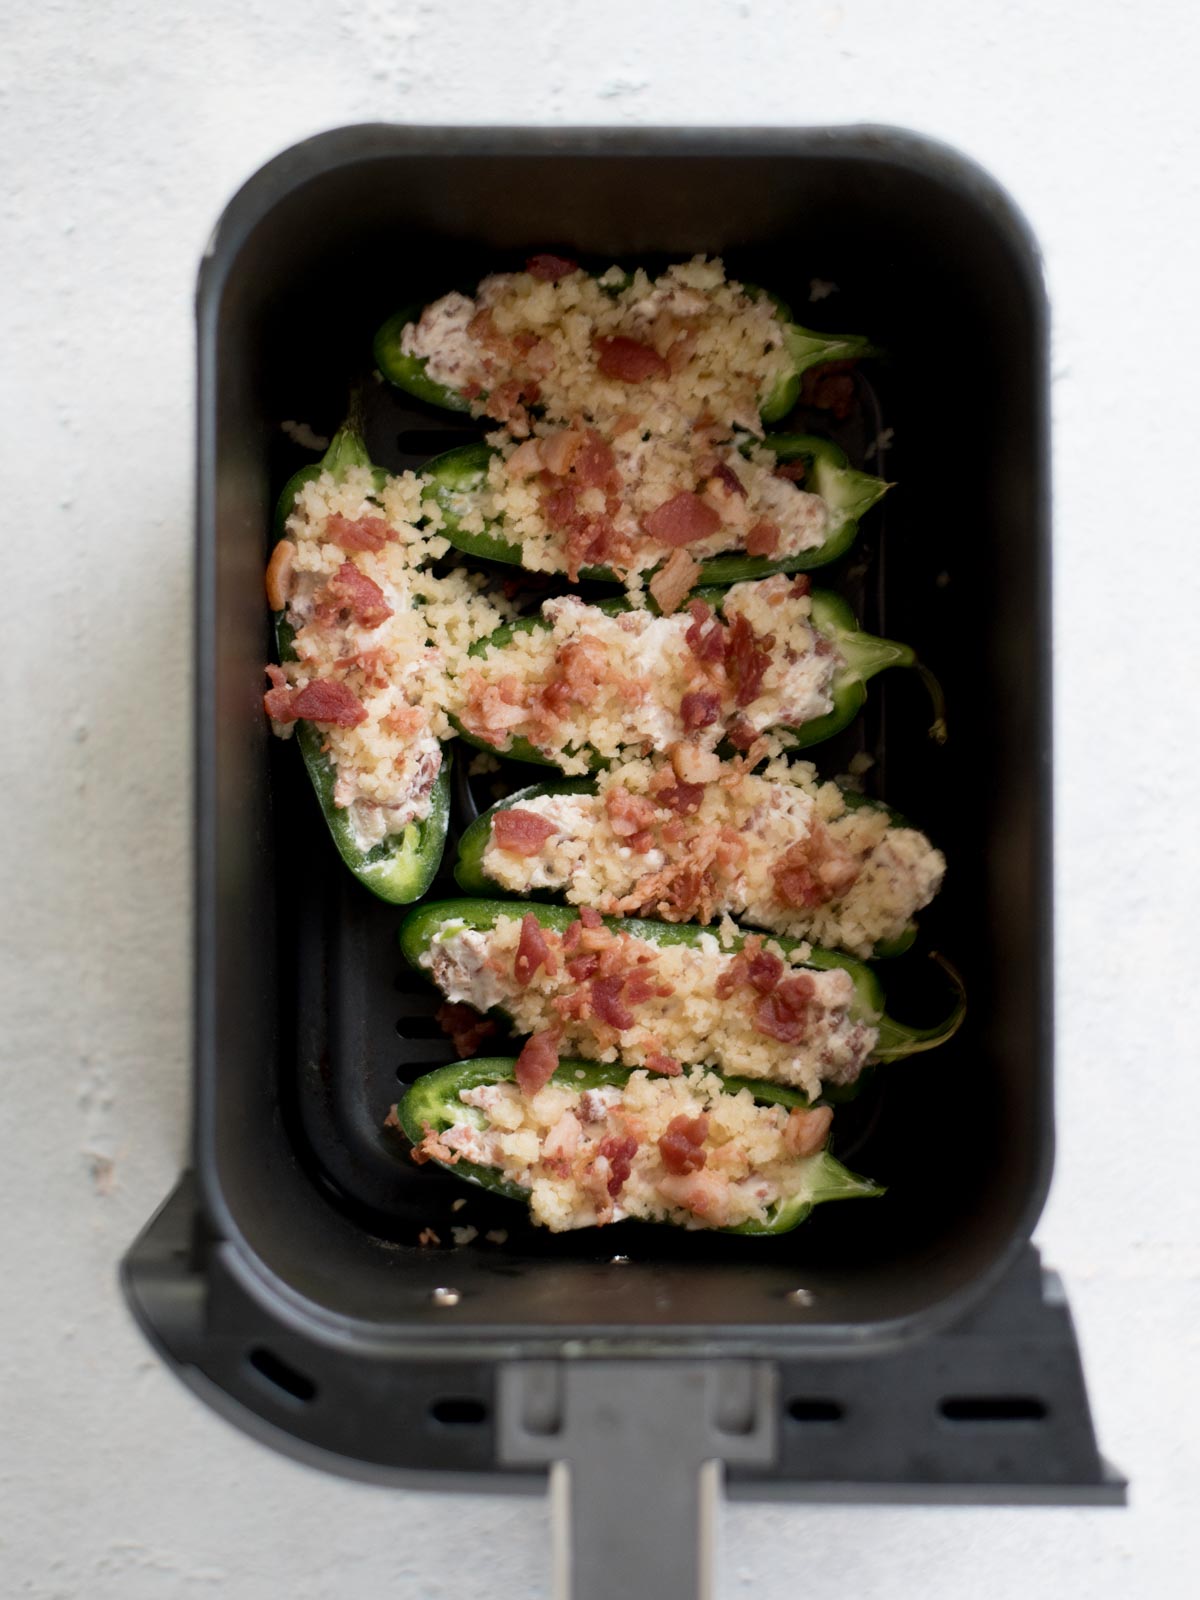 uncooked jalapeno poppers in an air fryer basket